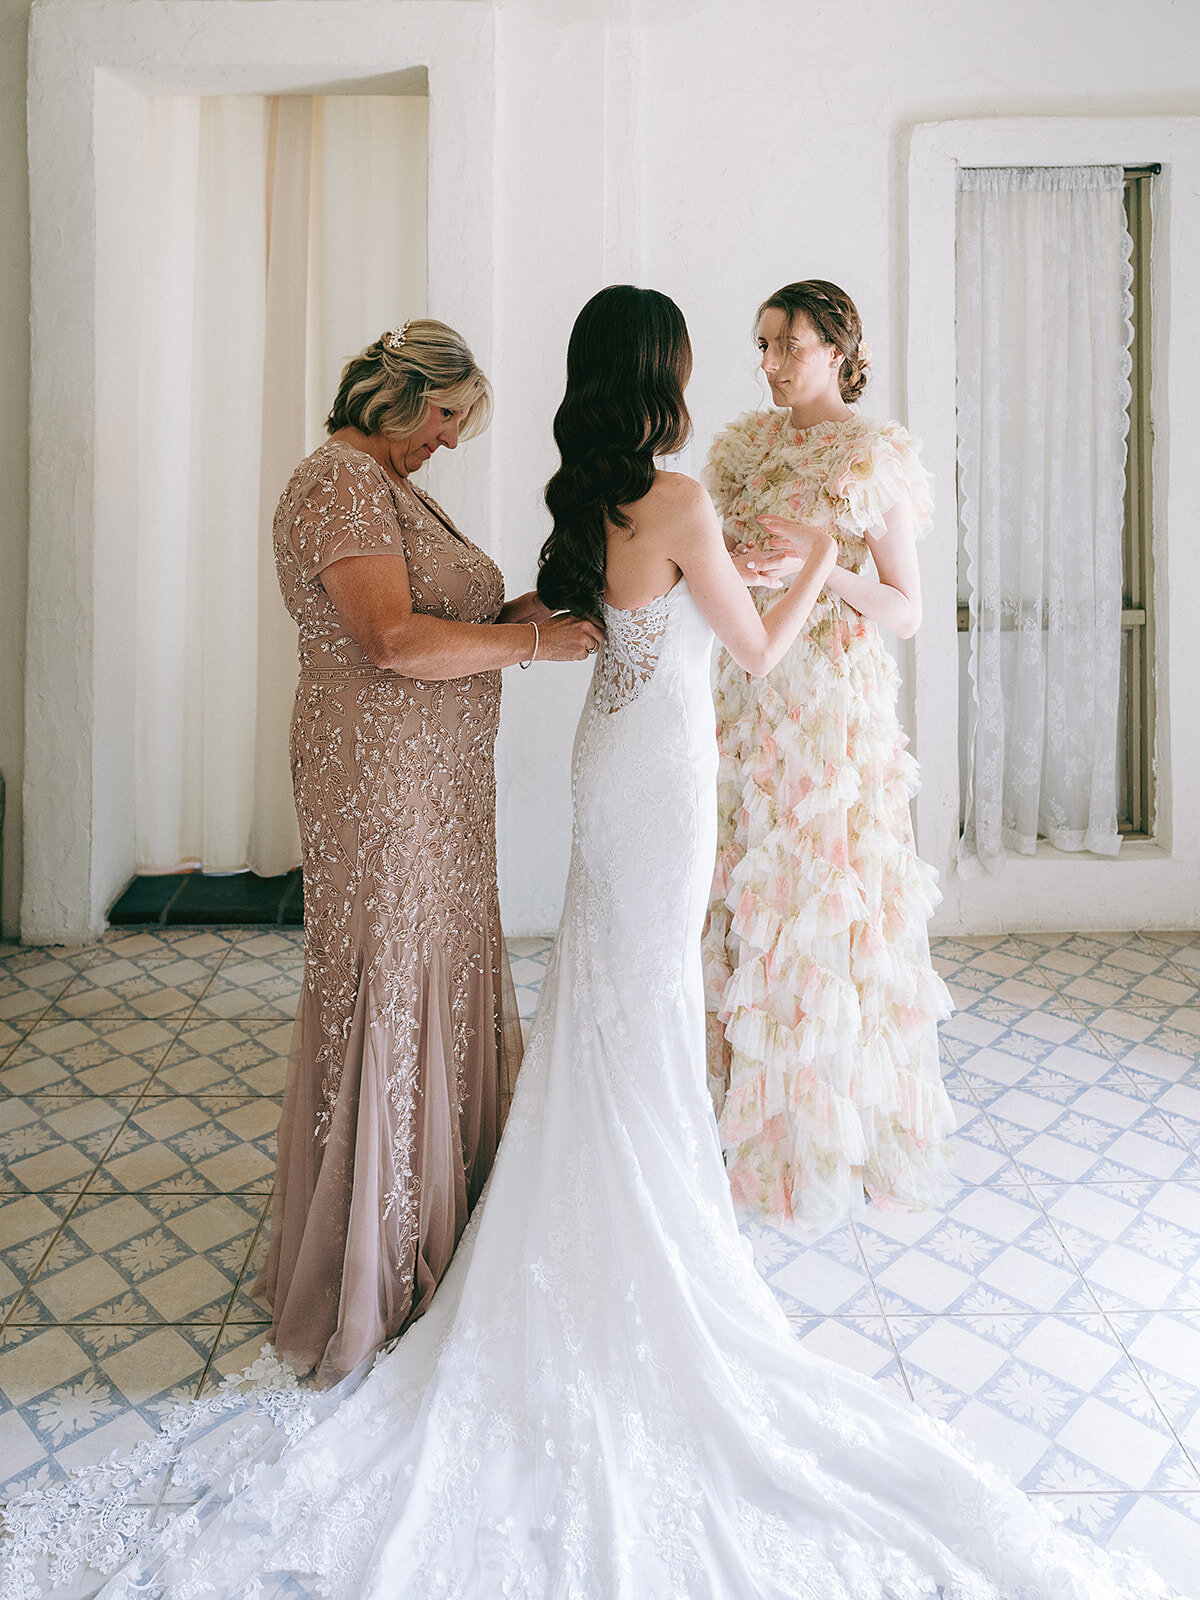 The bride gets dressed in the bridal suite at Villa Antonia assisted by her mother and maid of honor